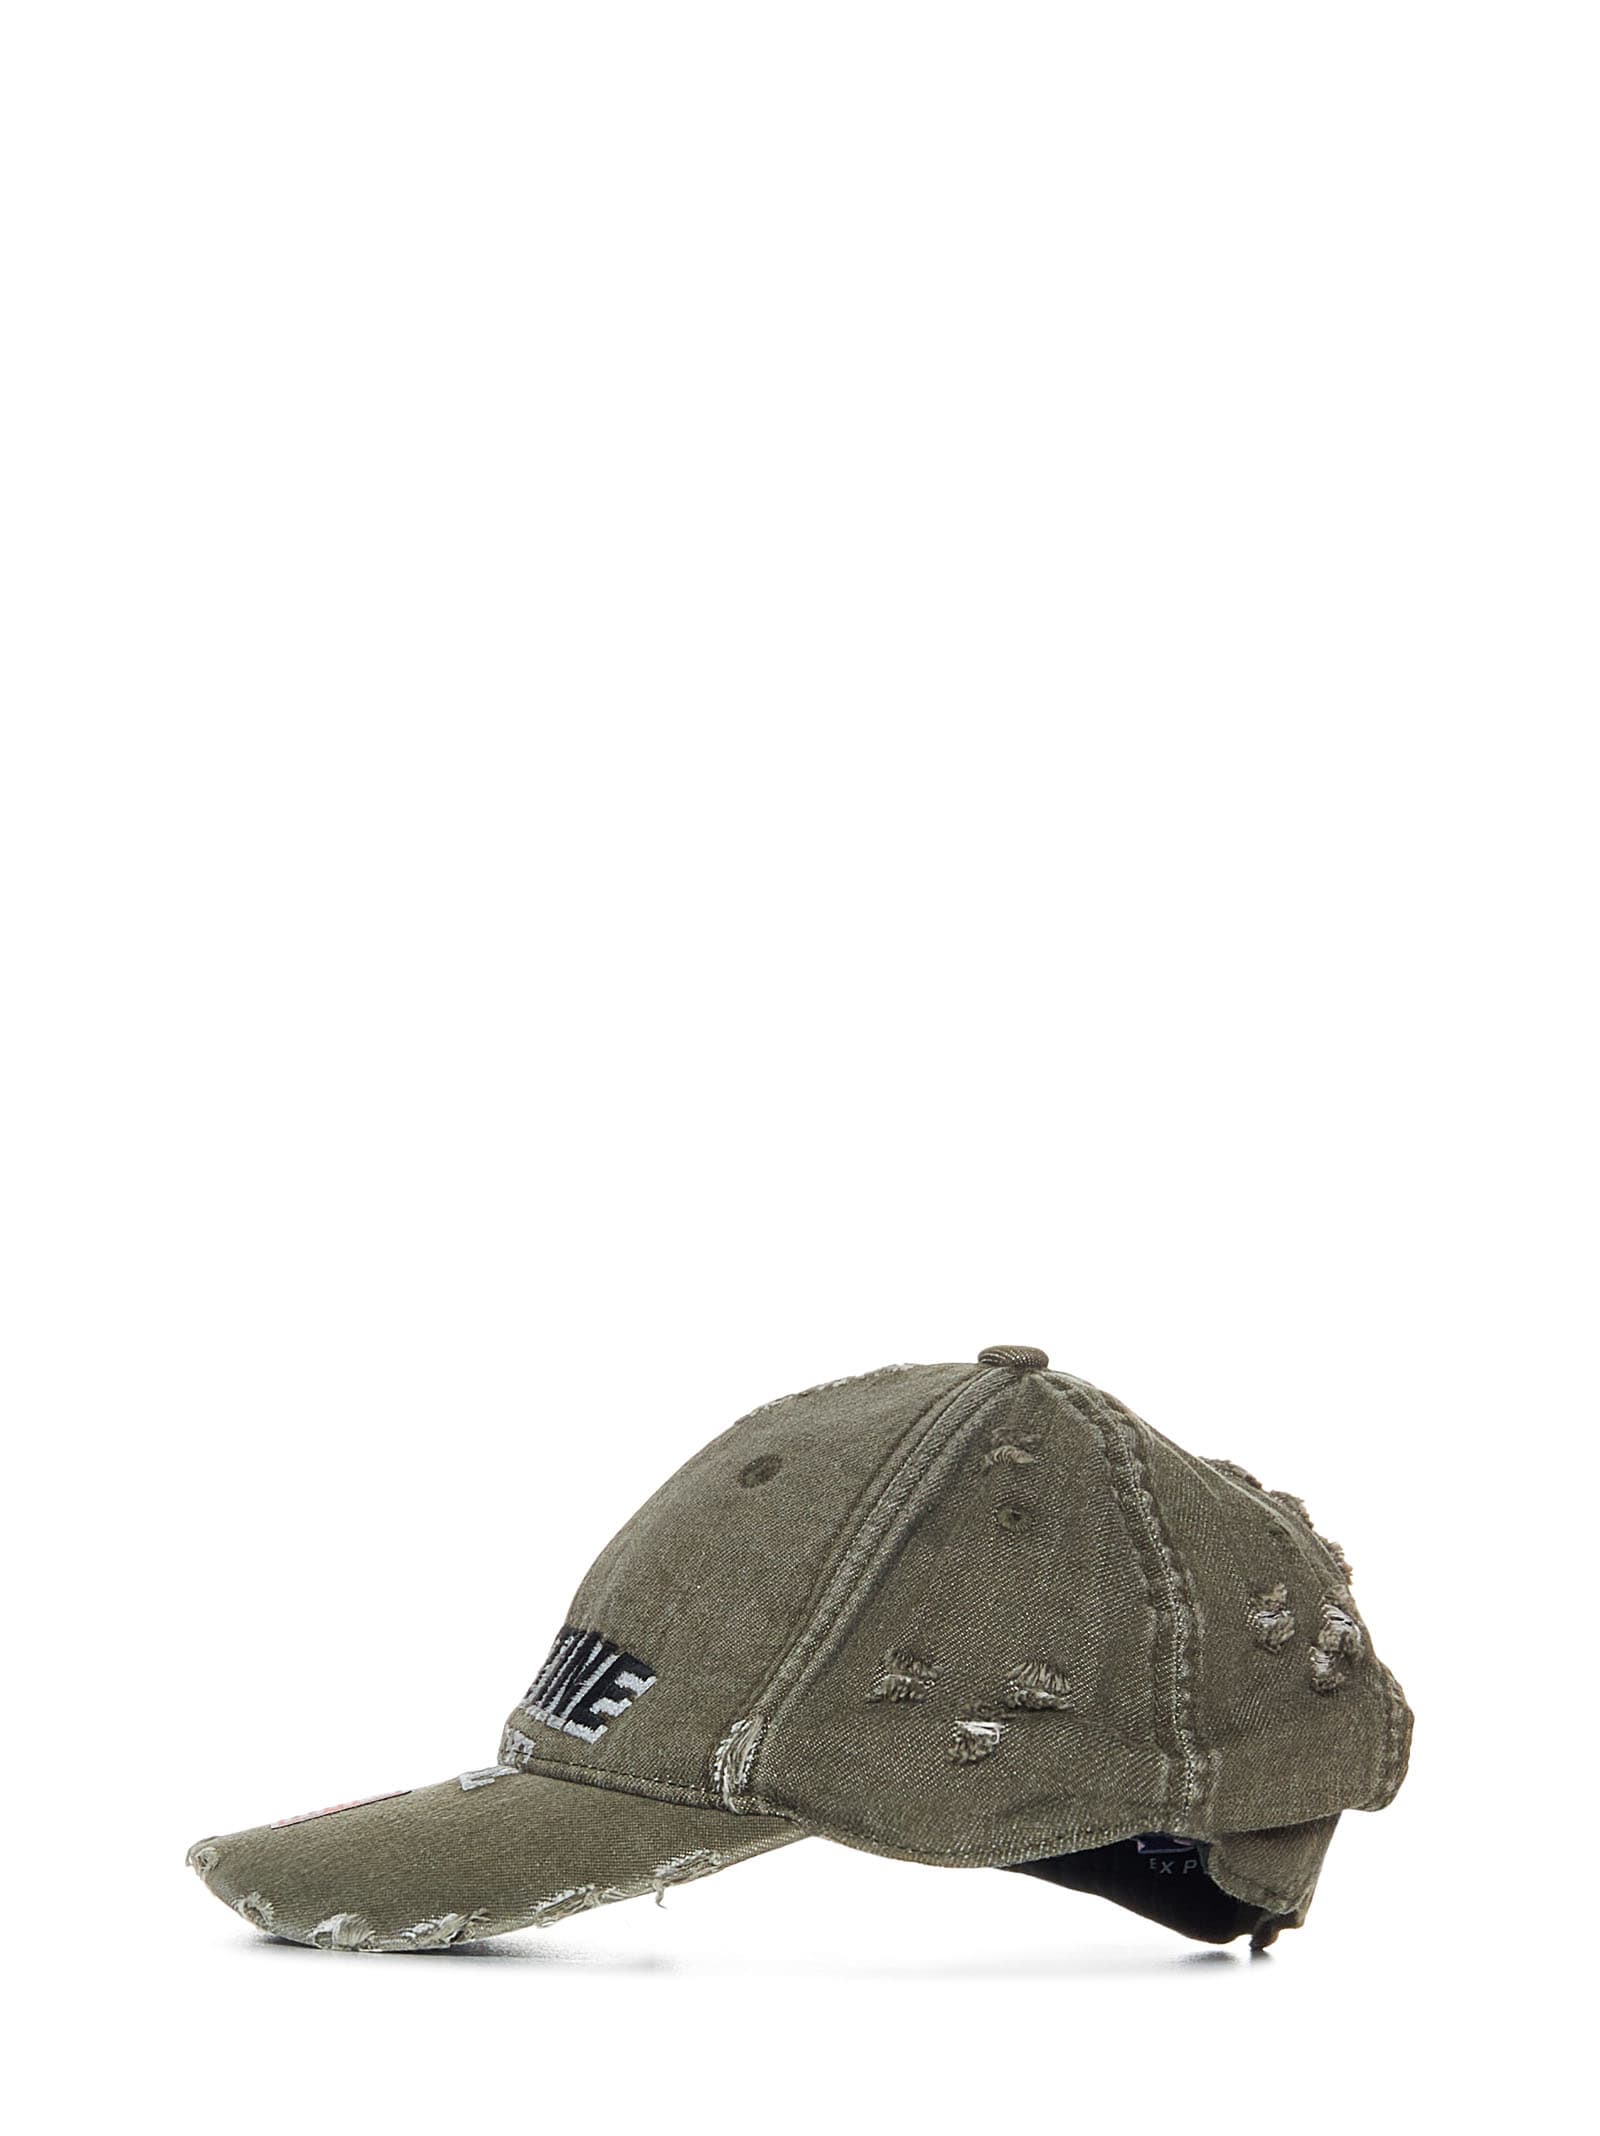 Martine Rose – Rolled Cap Green - One Size